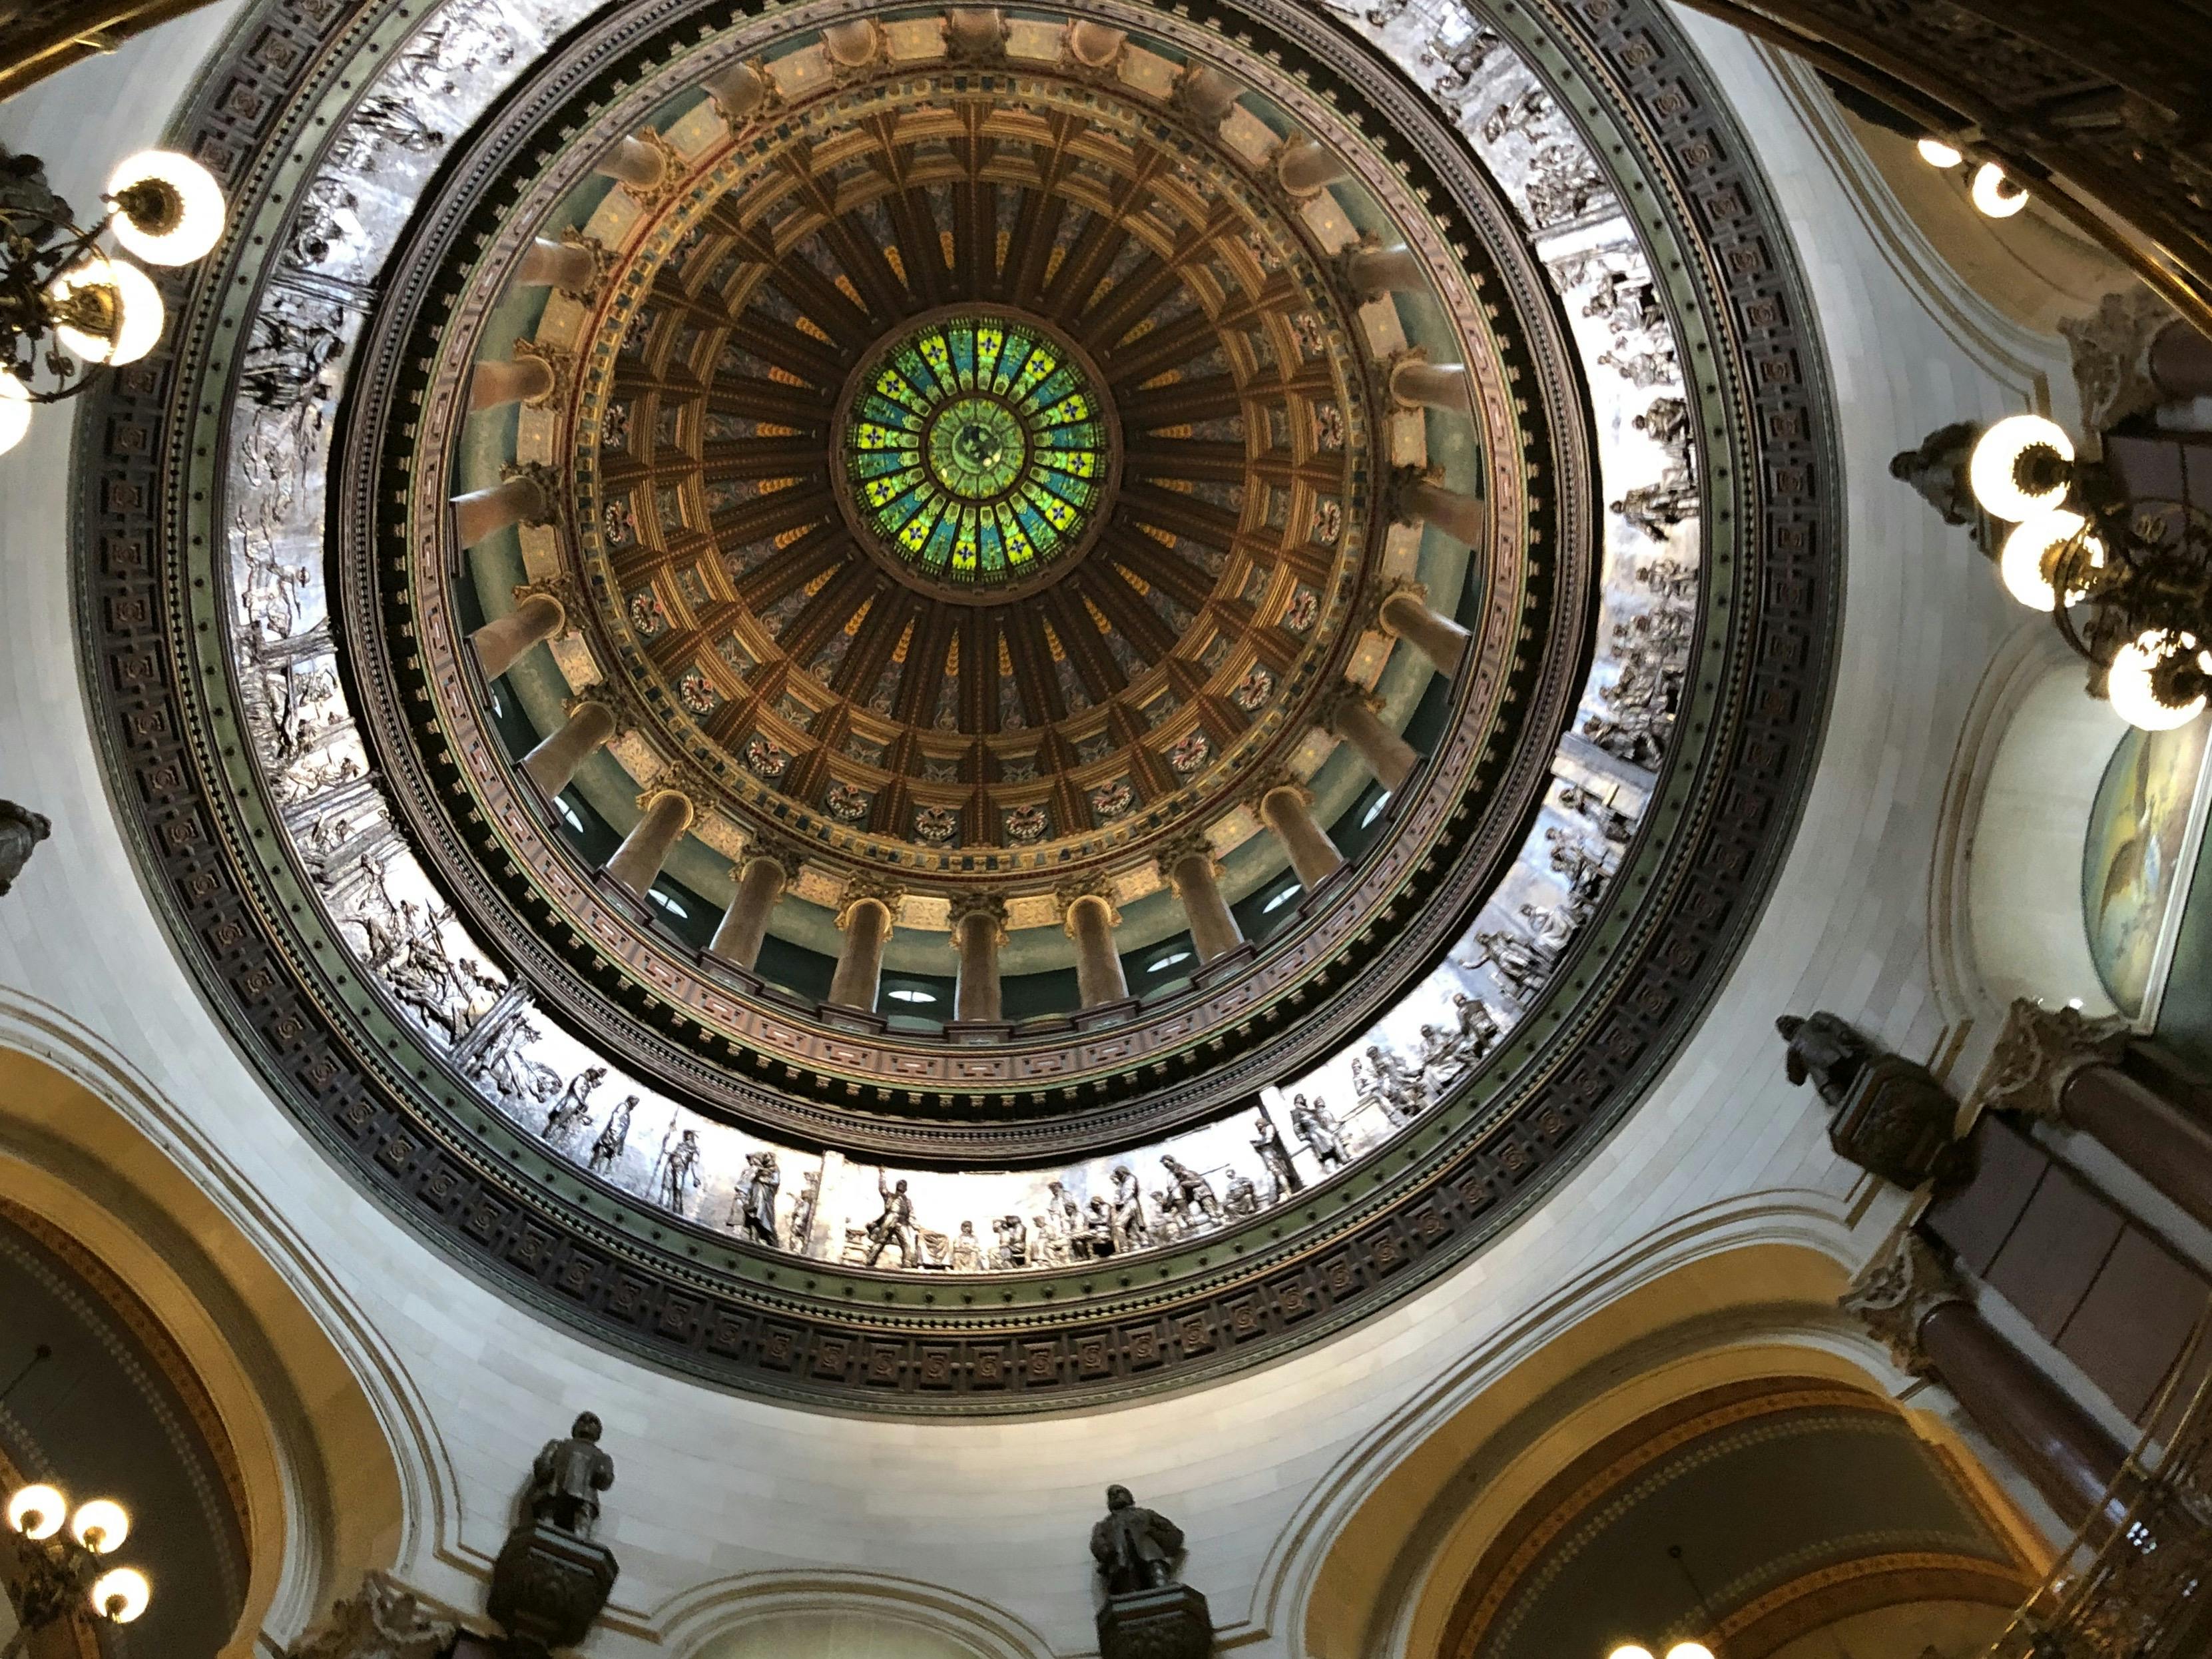 A circular, dome-shaped ceiling with statues lining the circumference. A stained glass window is at the very top.